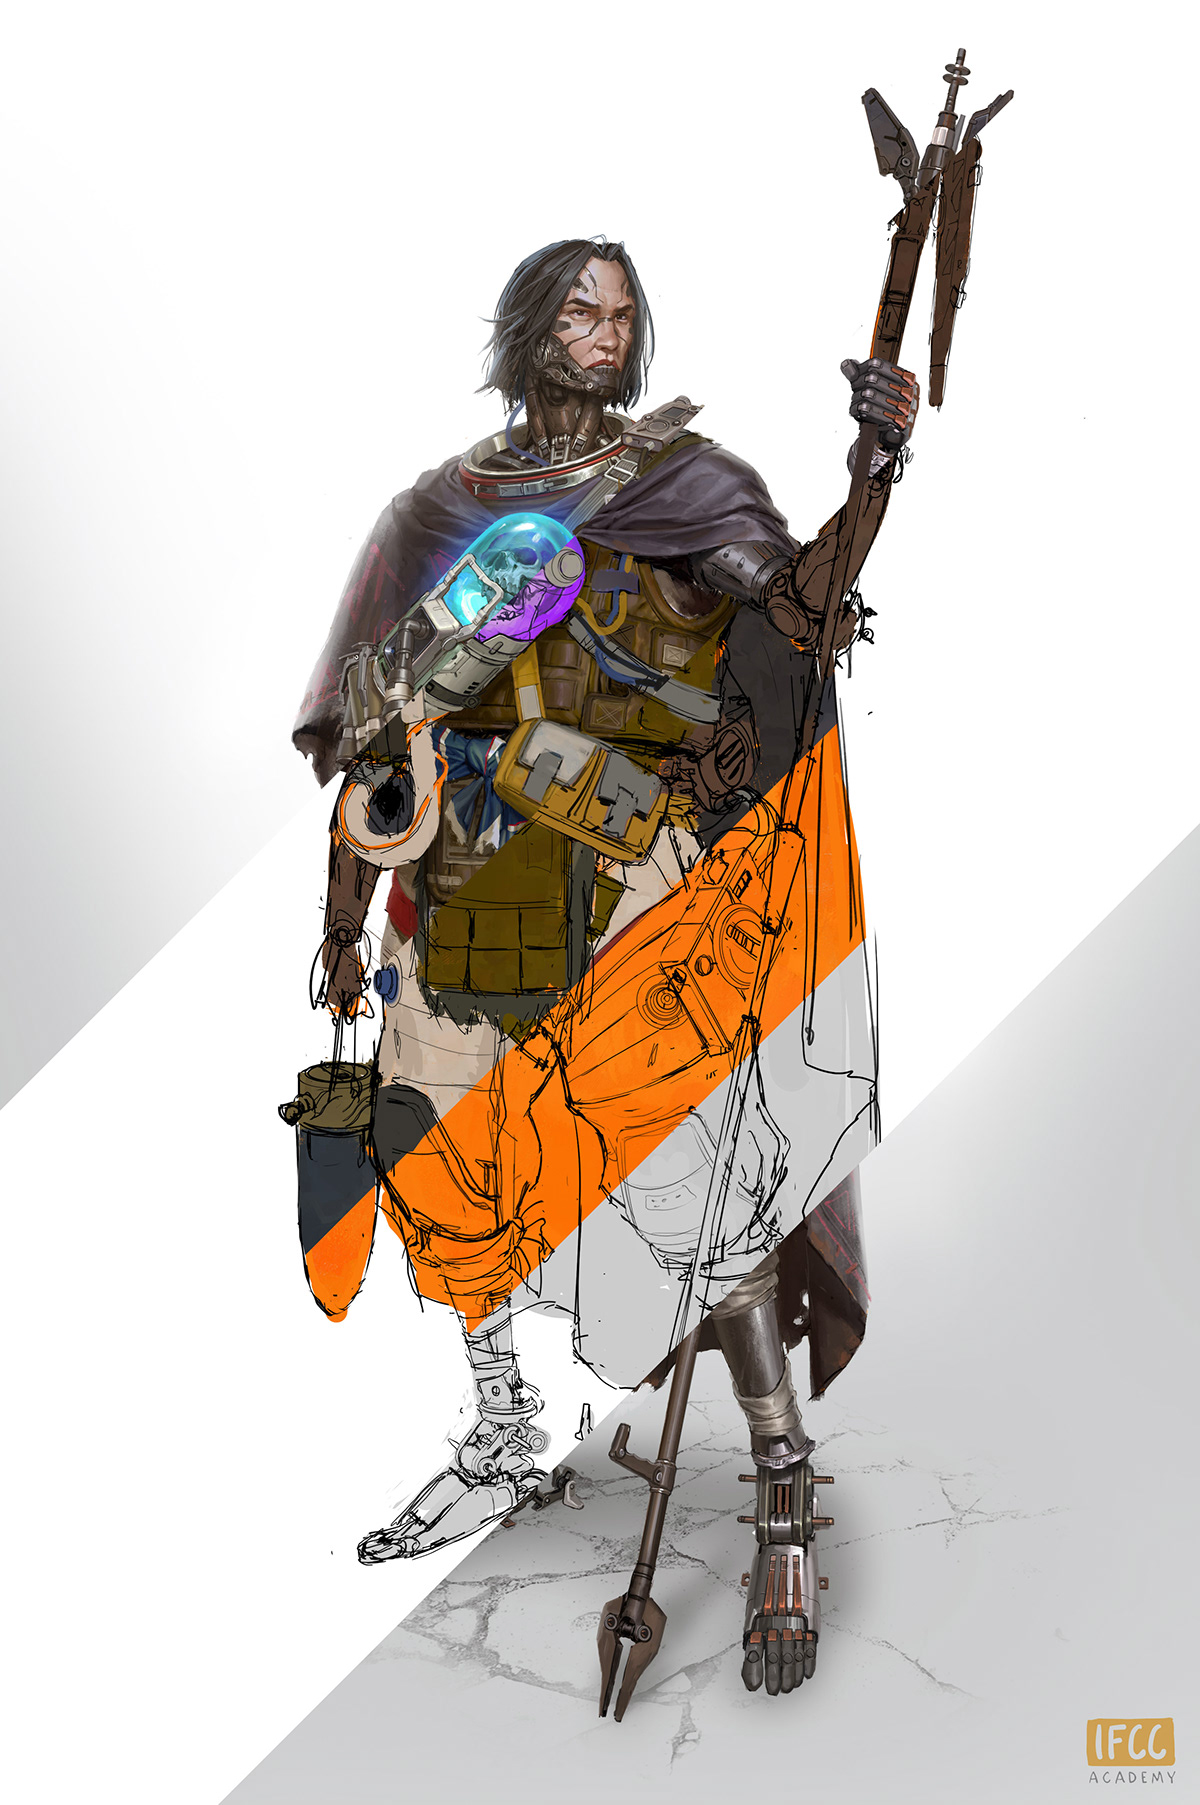 characterdesign conceptart Cyberpunk design Drawing  IFCC IFCCacademy ILLUSTRATION  painting   postapocalyptic